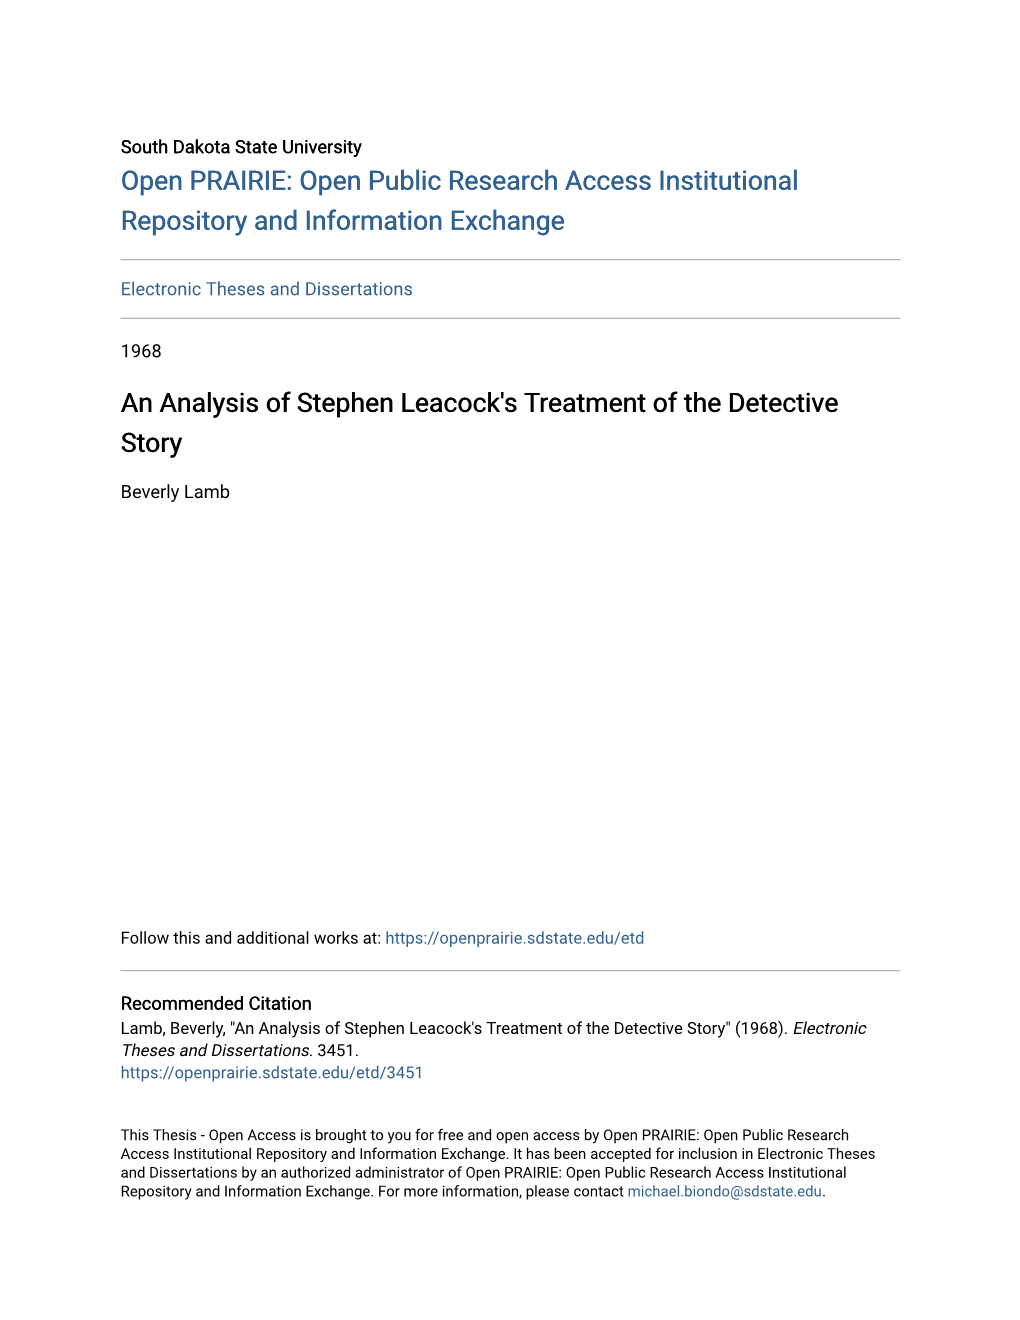 An Analysis of Stephen Leacock's Treatment of the Detective Story